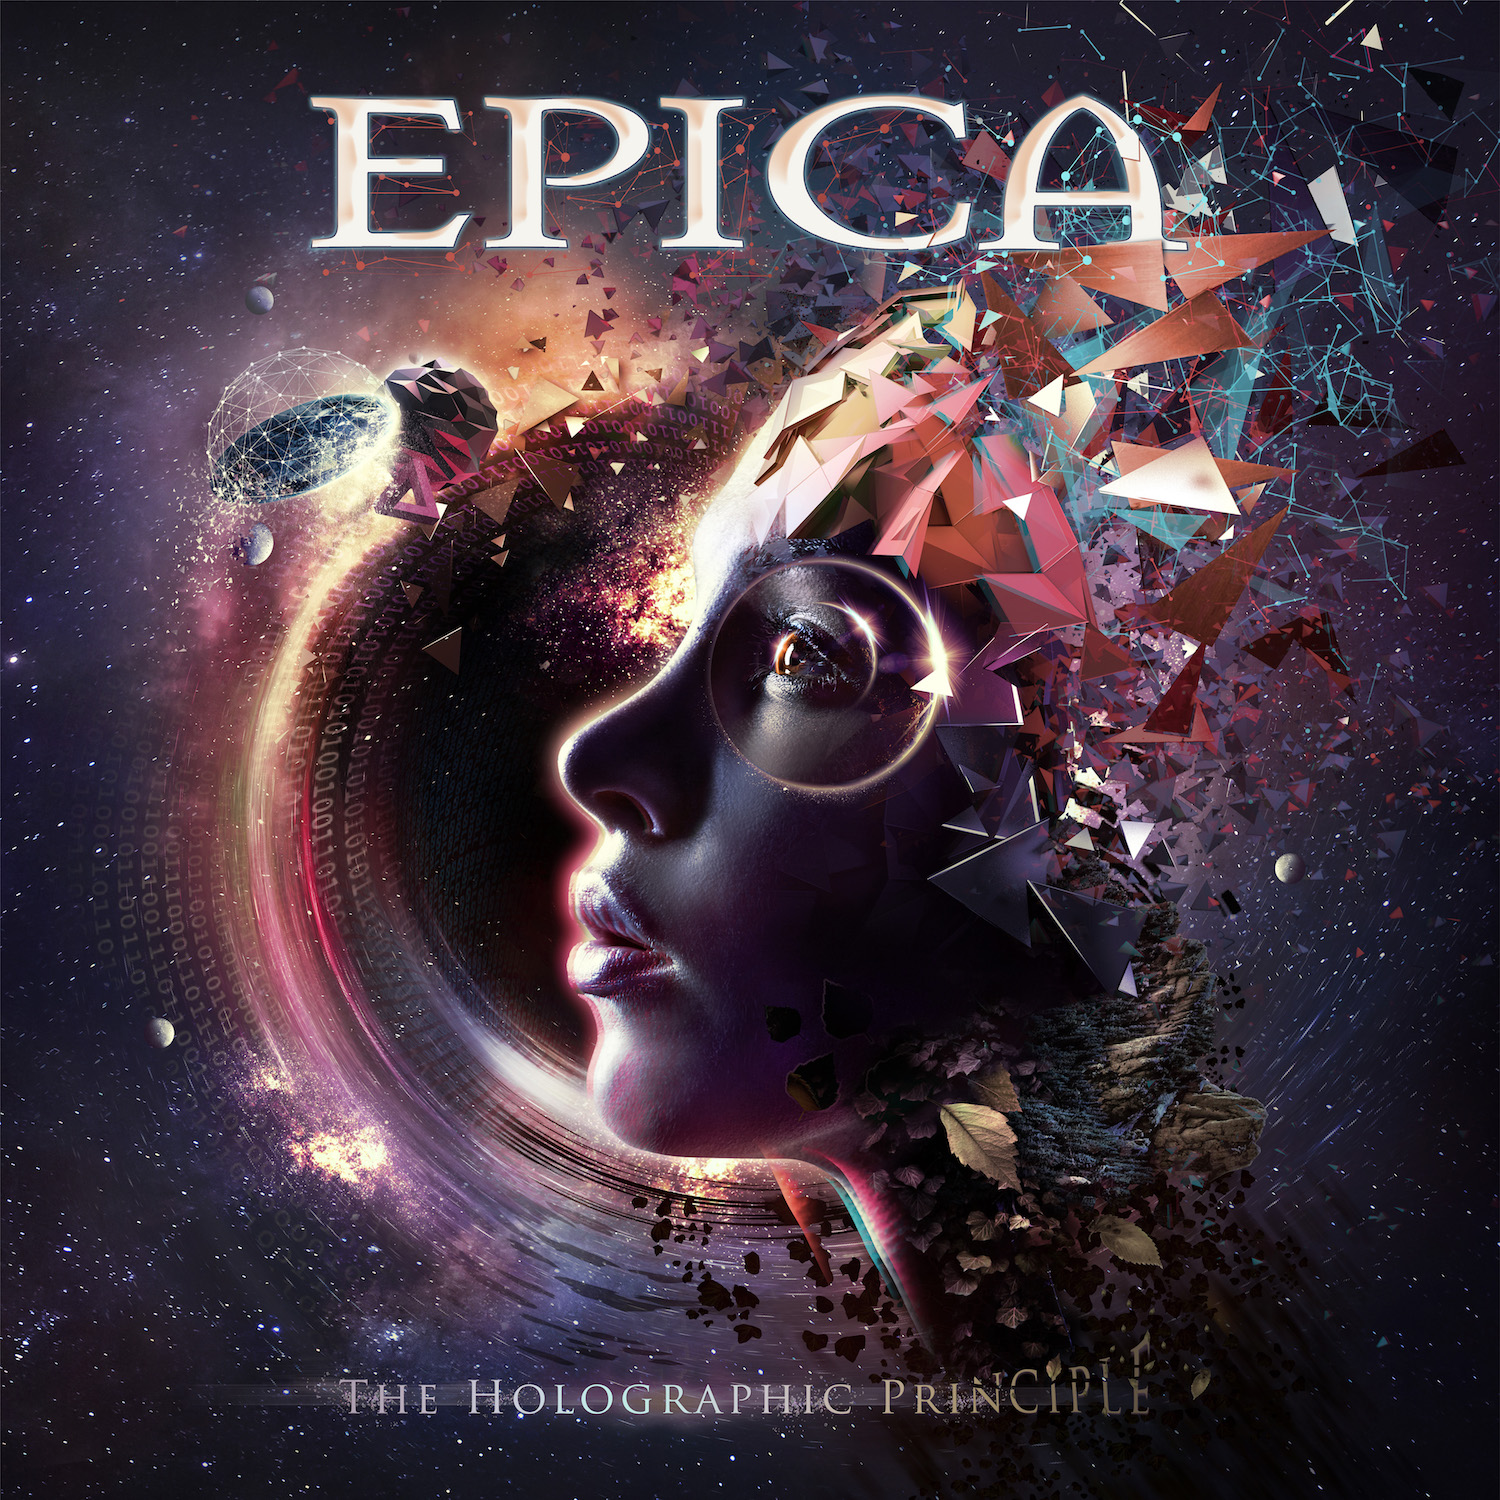 epica-the-holographic-principle_4000px